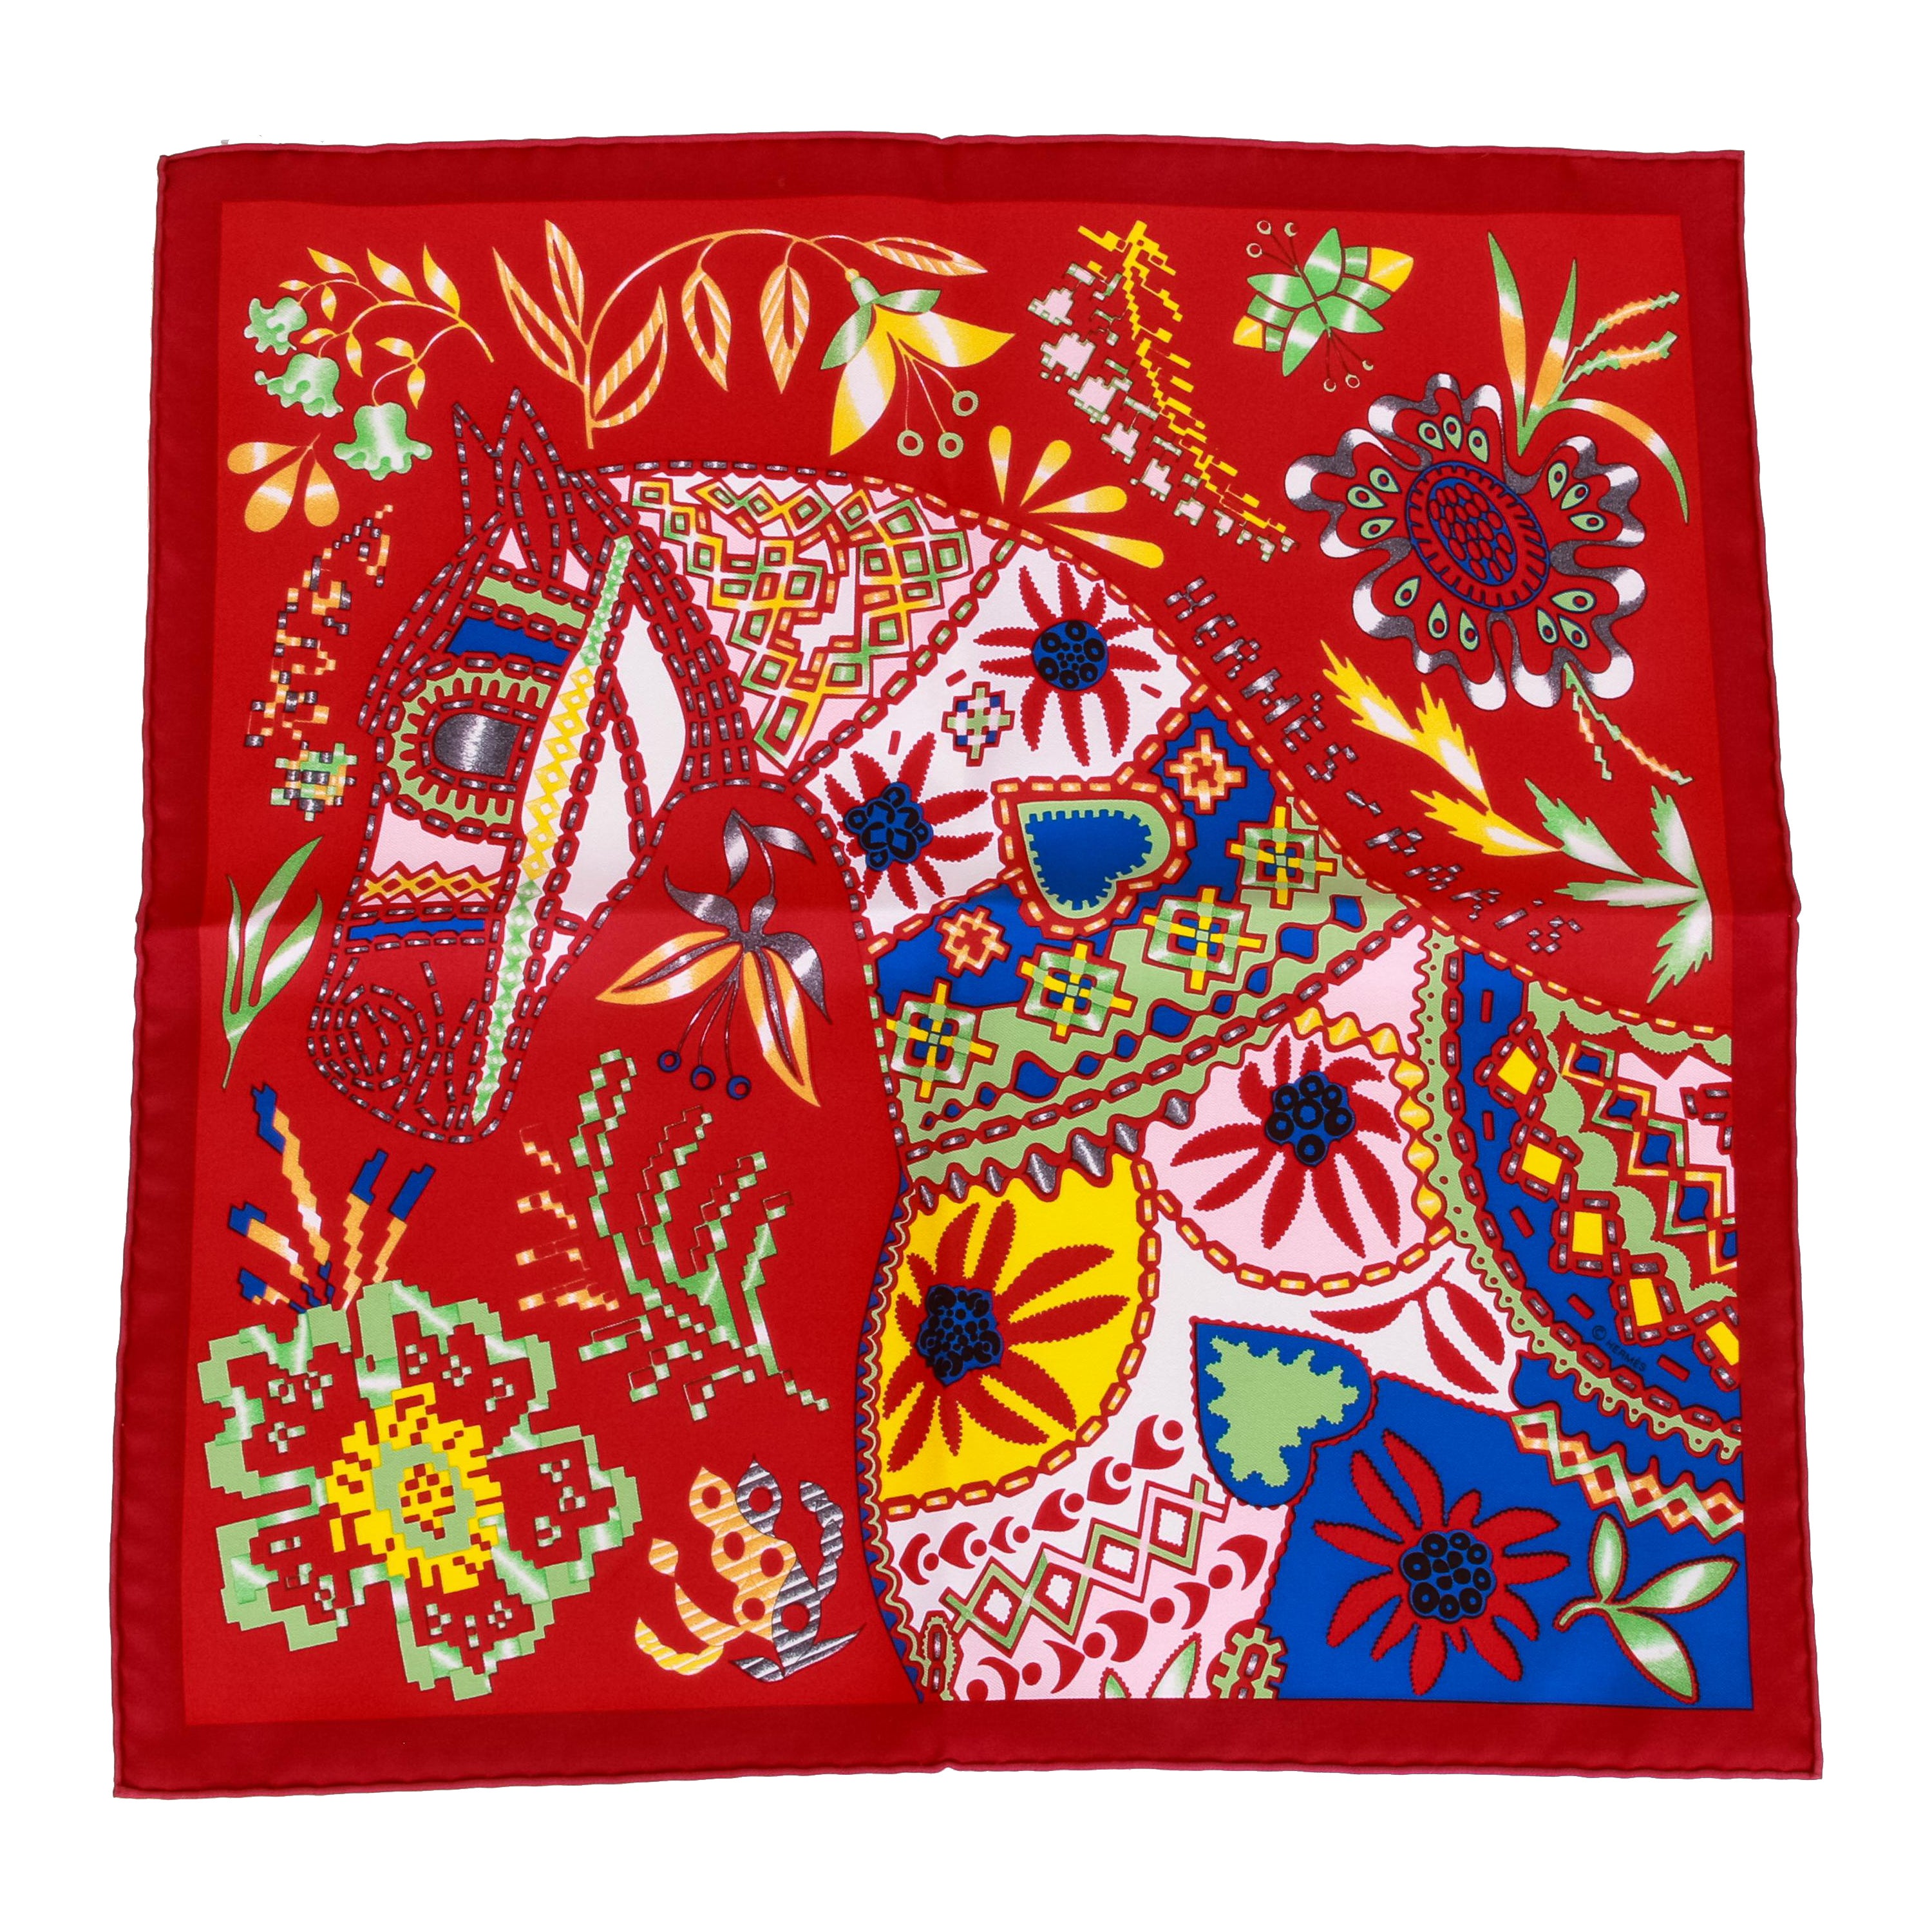 New Hermes Red Horse Silk Gavroche 16.5" Scarf in Box For Sale